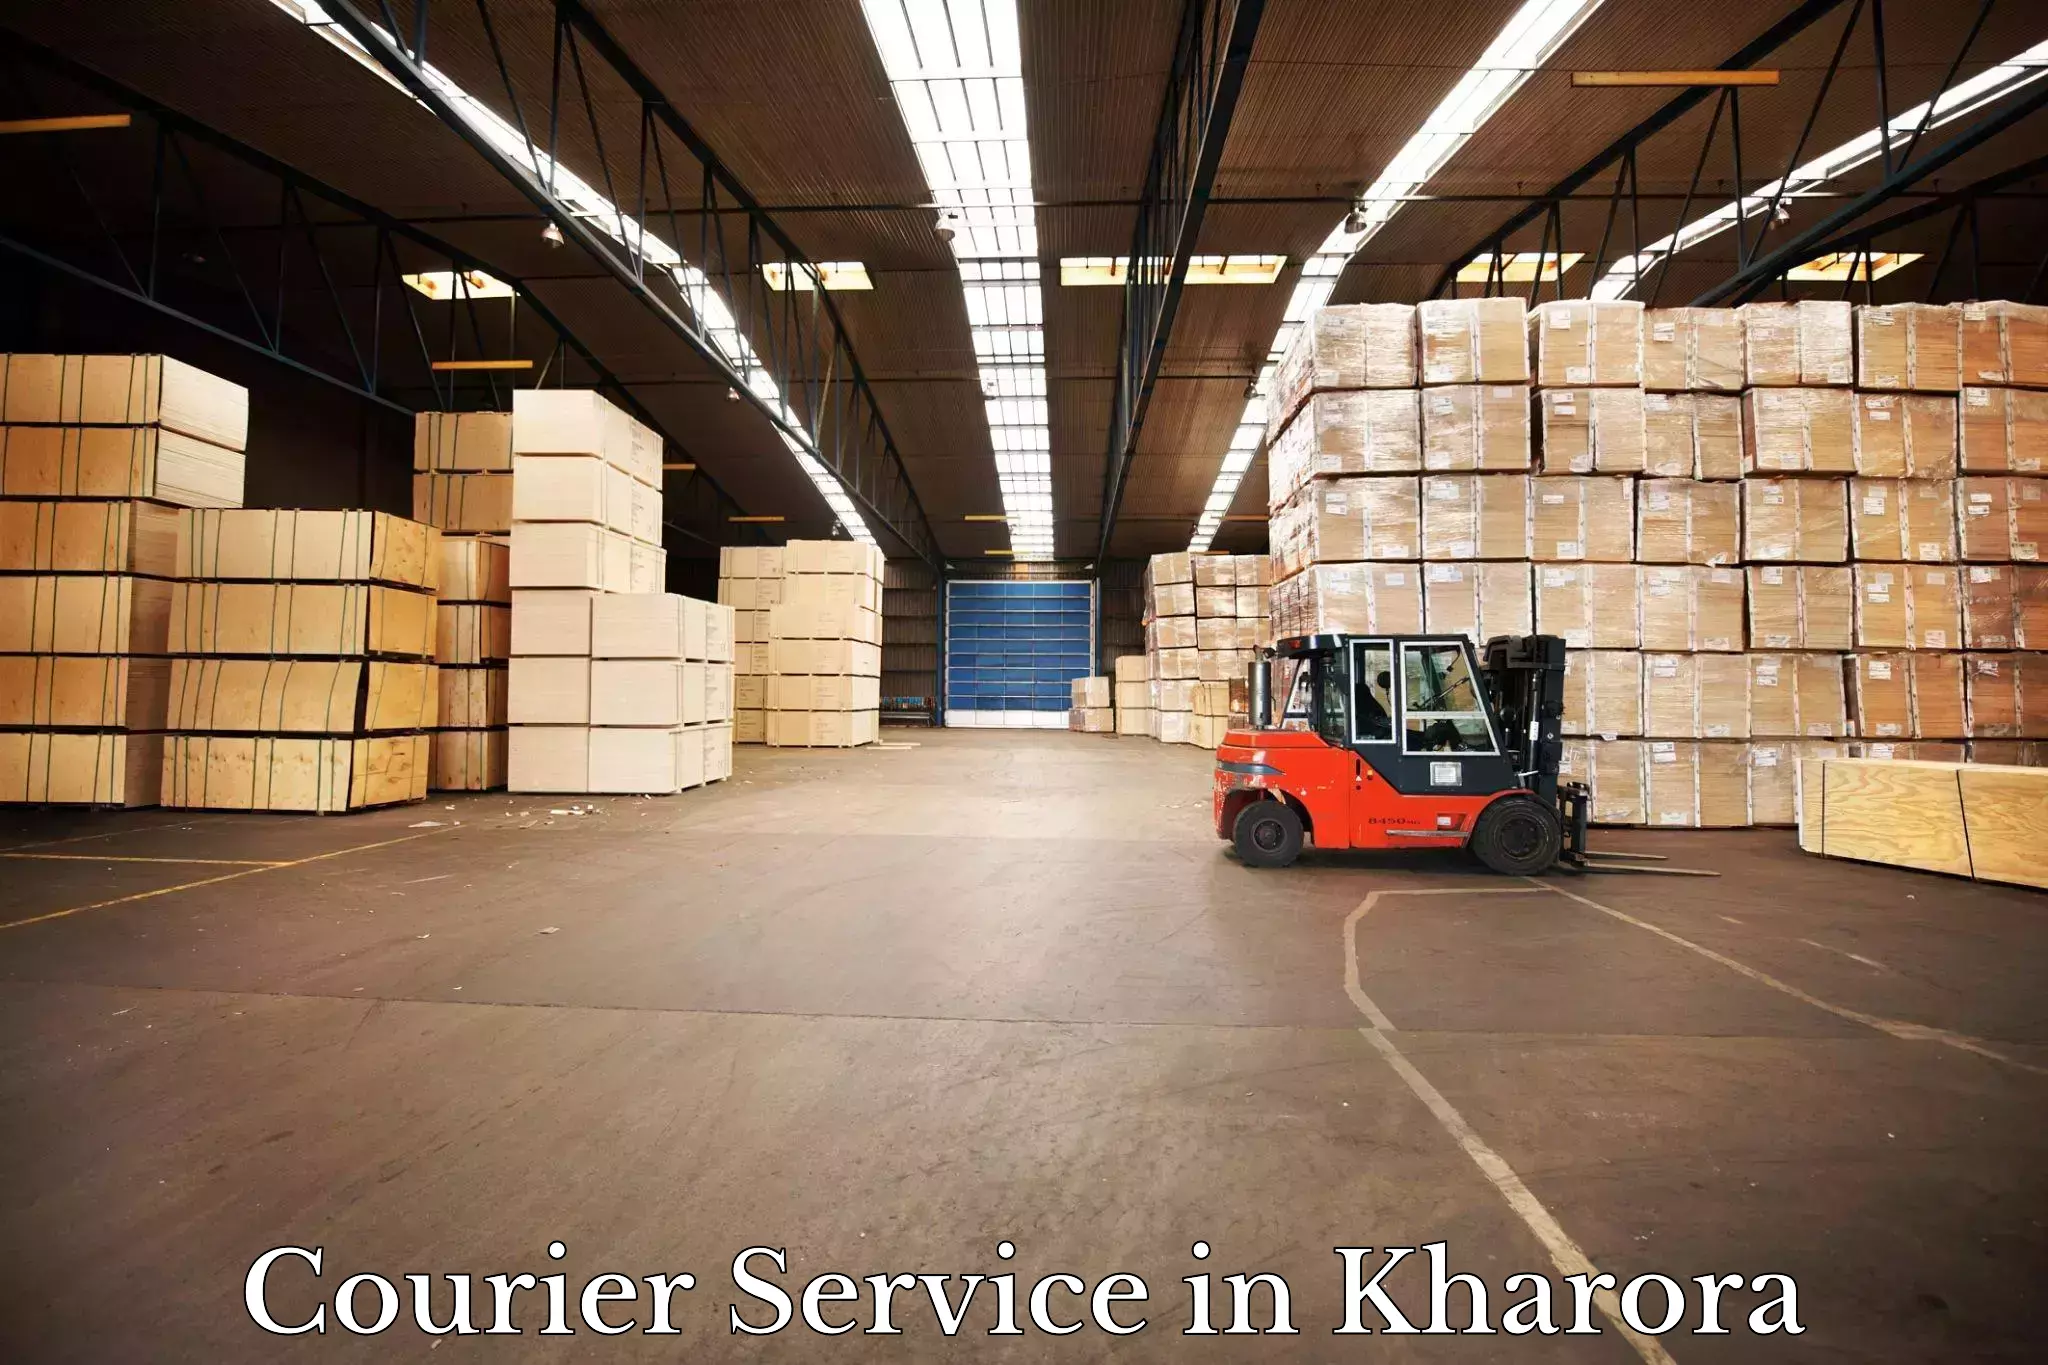 24/7 shipping services in Kharora